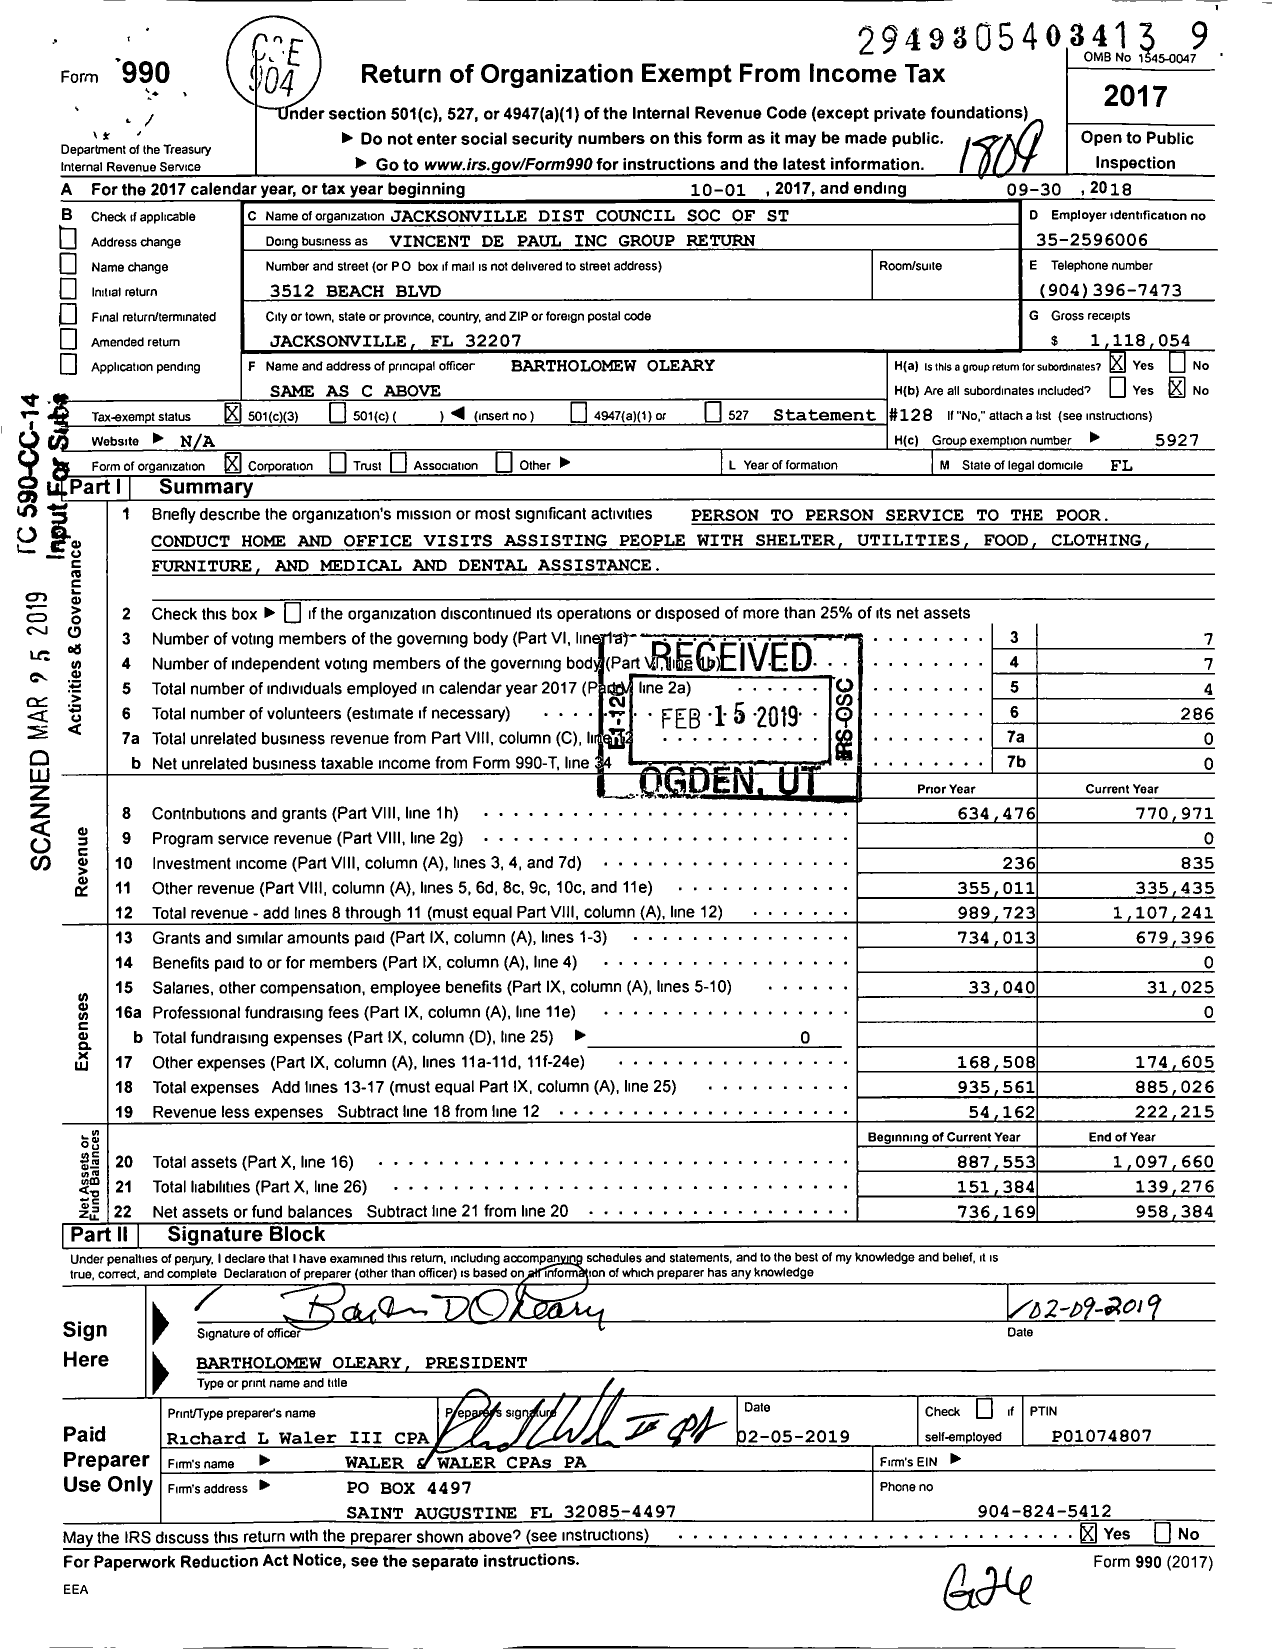 Image of first page of 2017 Form 990 for Vincent de Paul Group Return